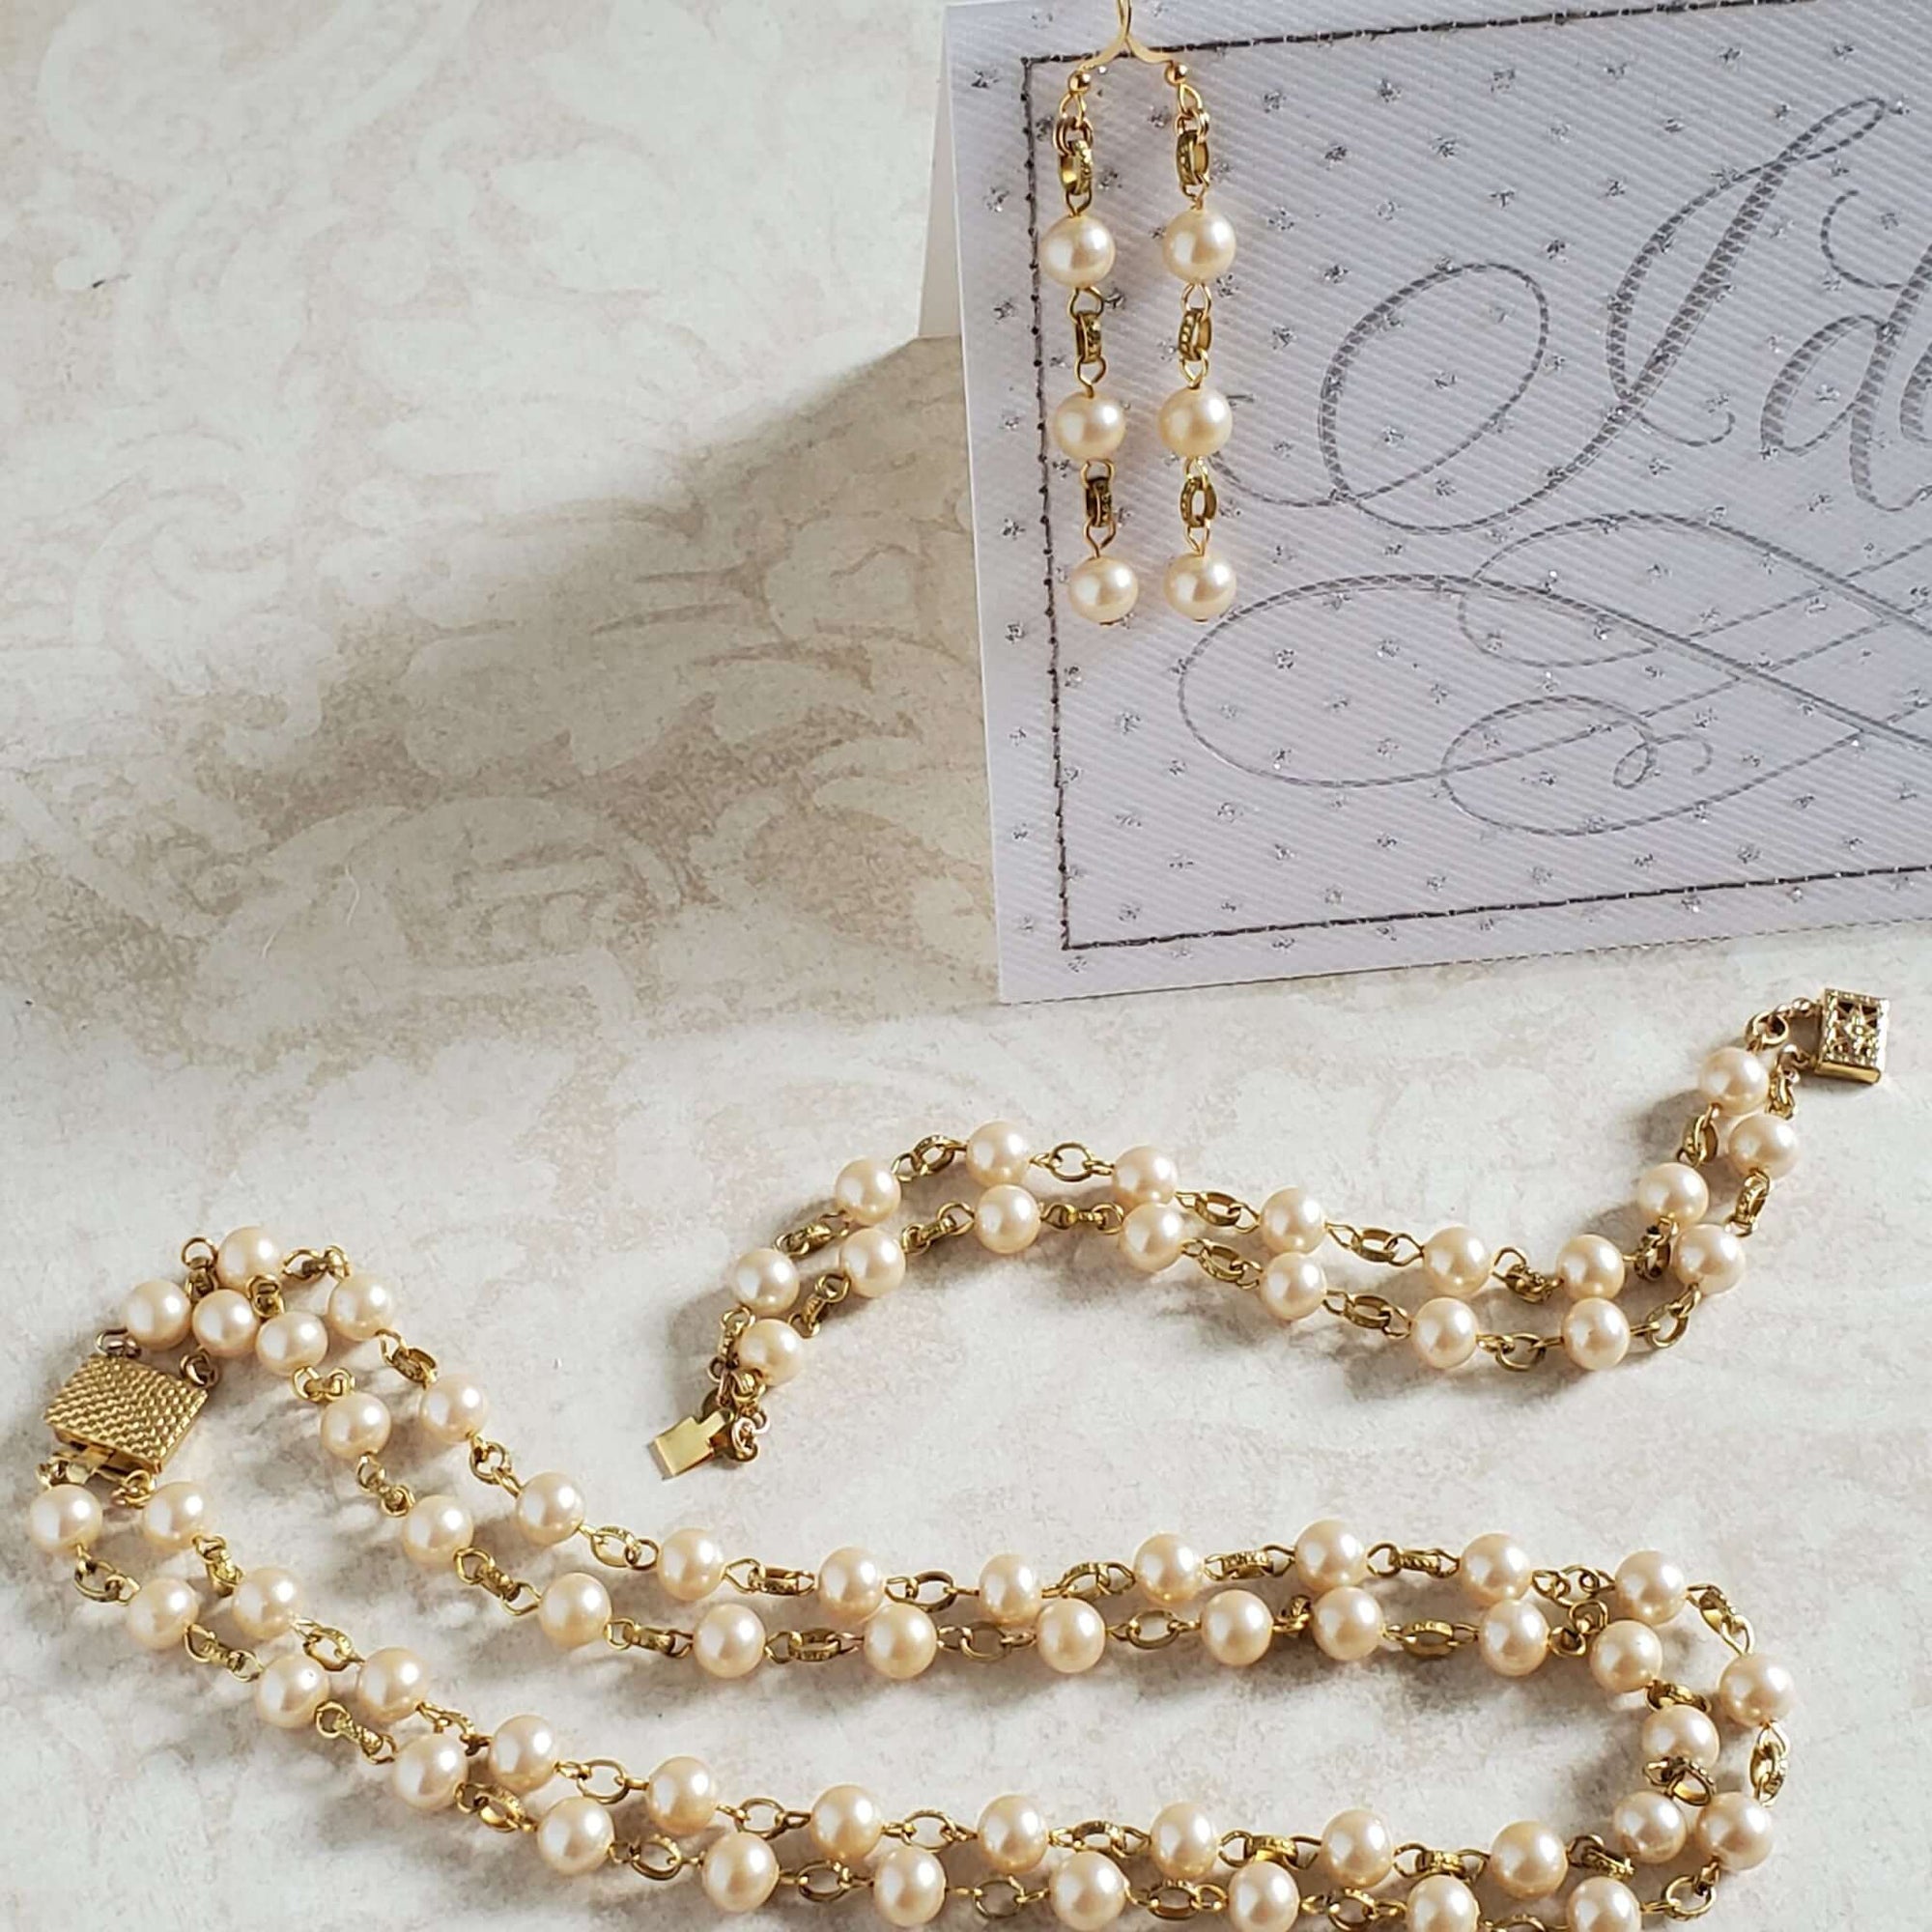 Vintage Pearl Necklace, Bracelet and Earring Collection